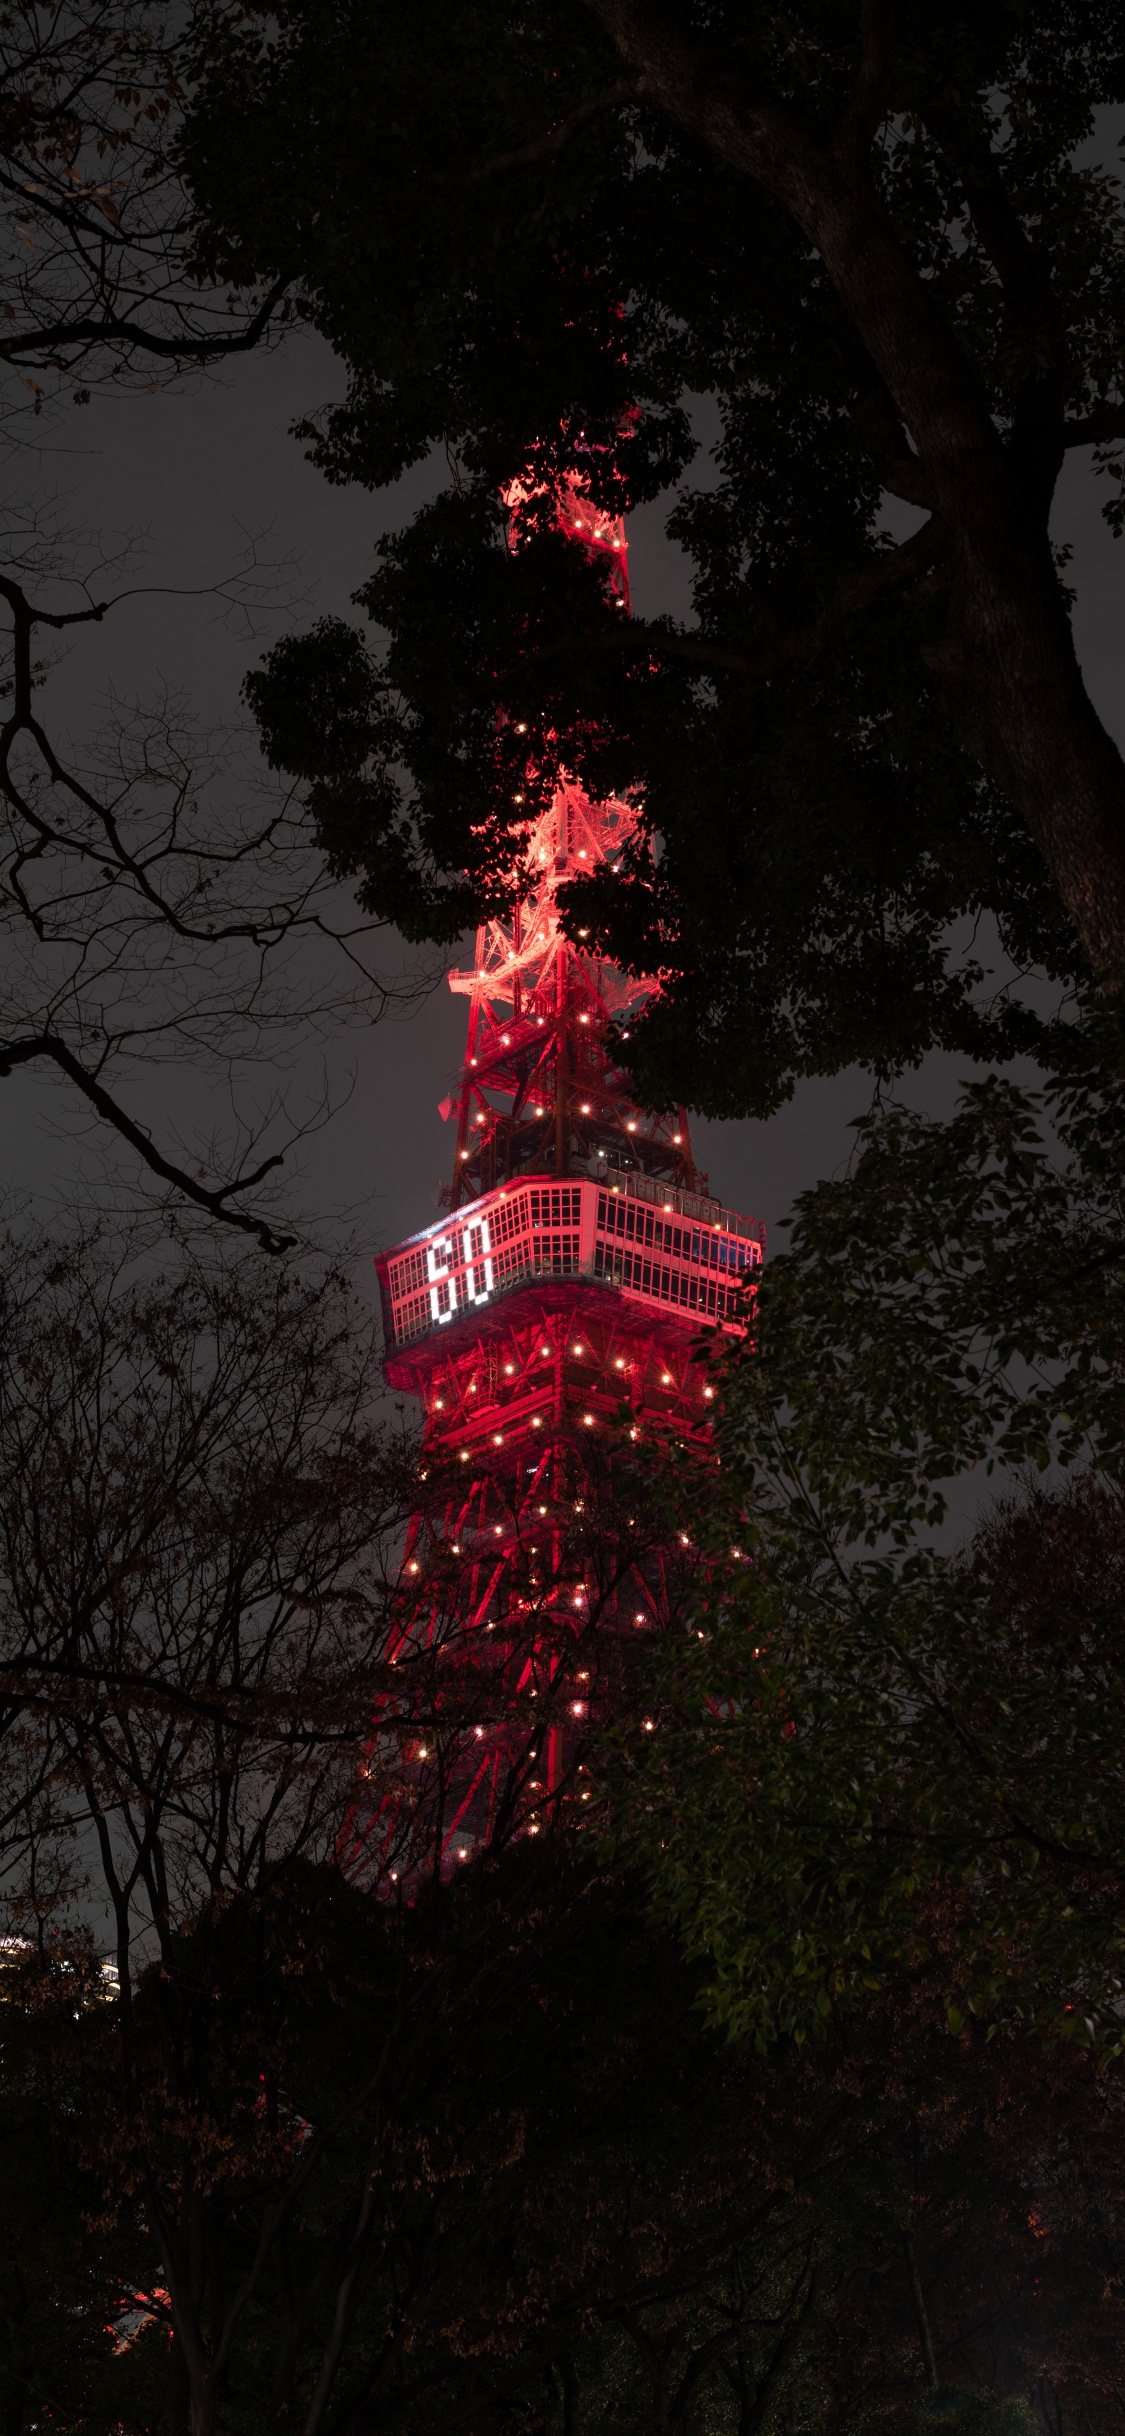 Red and White Tower Near Trees During Night Time. Wallpaper in 1125x2436 Resolution